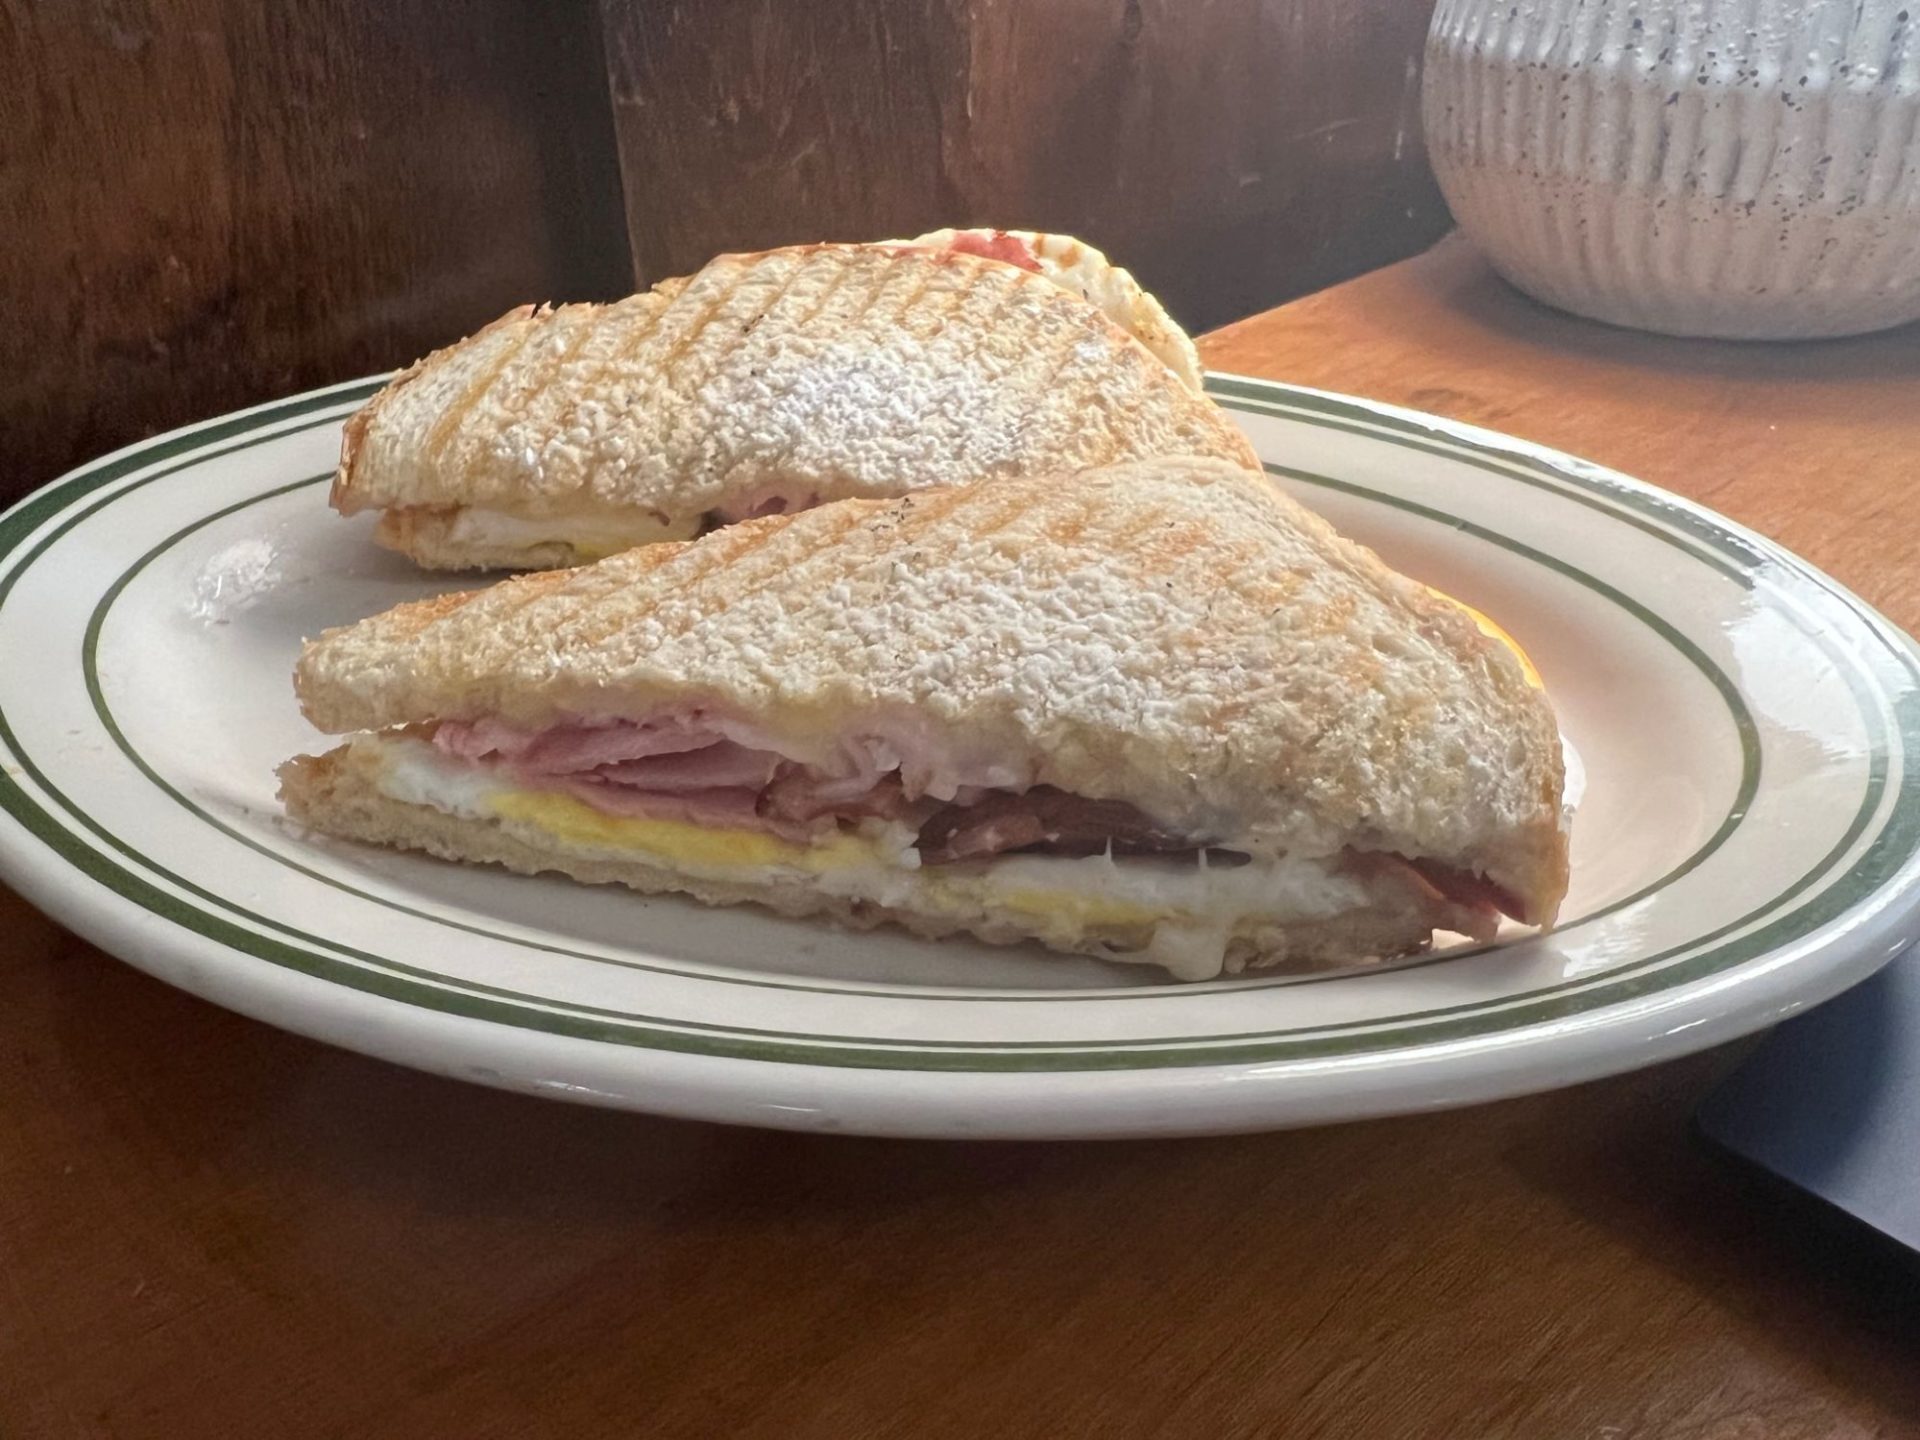 Two halves of a sandwich, cut diagonally, rest on an oval shaped white plate. There is ham, cheese, and egg melted together in the center, and the tops of the bread are dusted with powdered sugar.